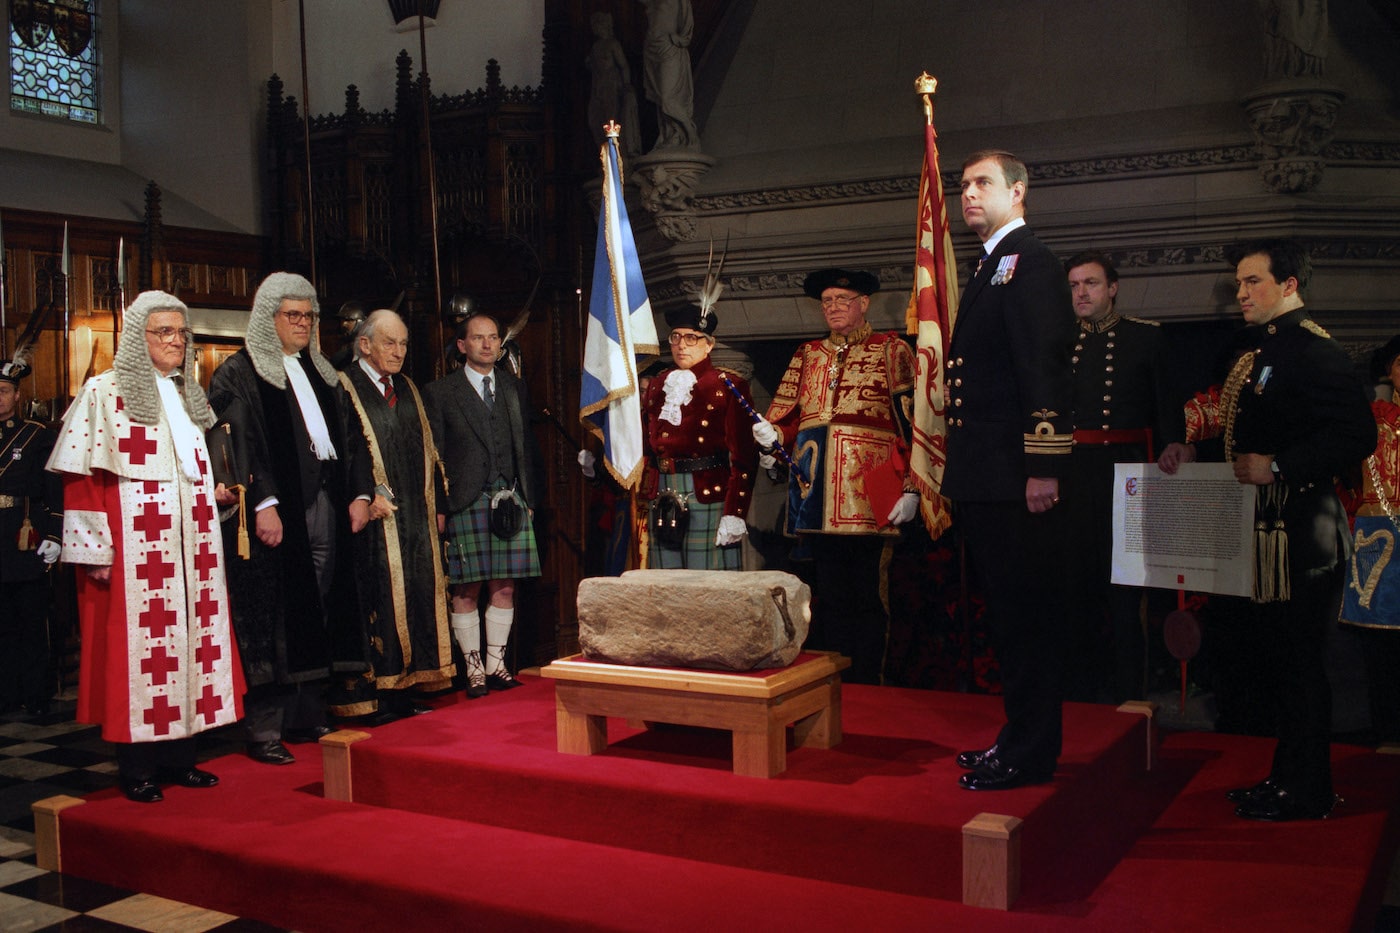 Duke of York stands next to the Stone of Destiny